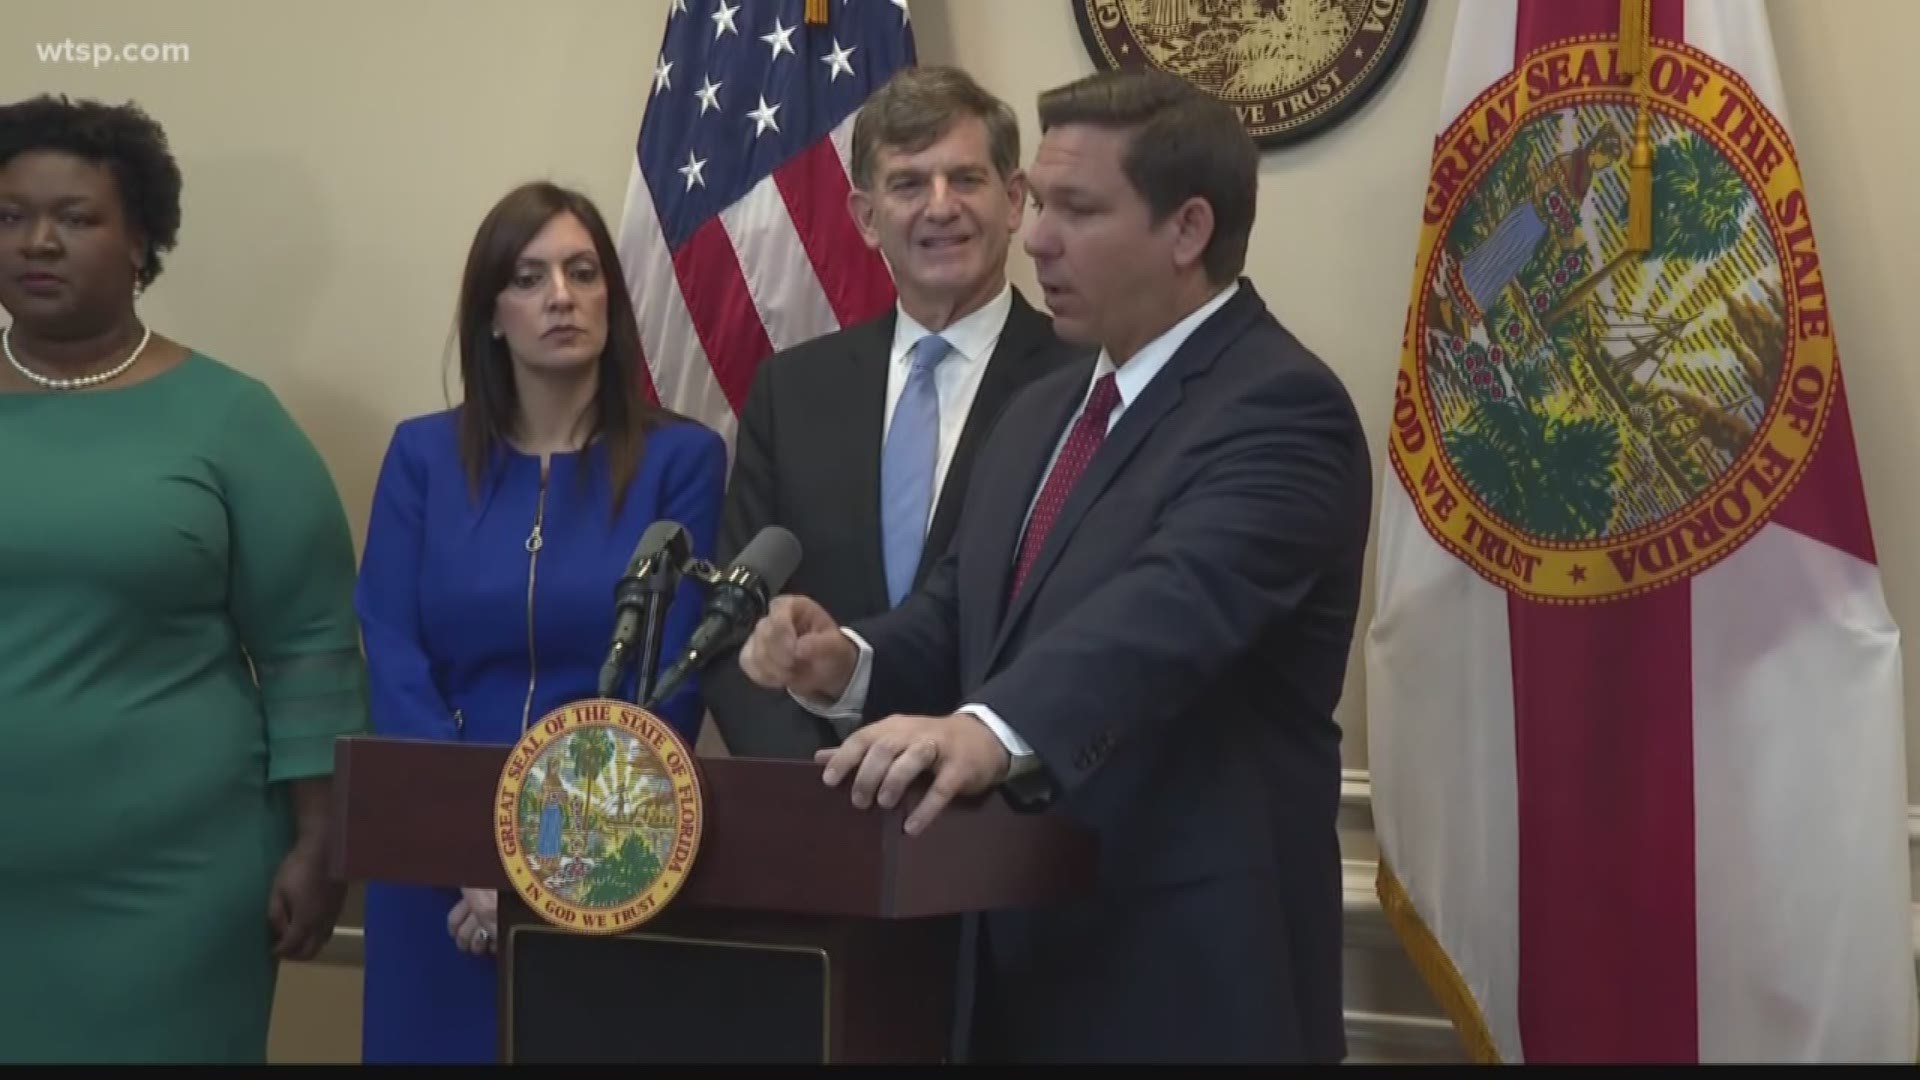 Governor Ron DeSantis was unclear Thursday on how the outbreak might affect the state’s economy.